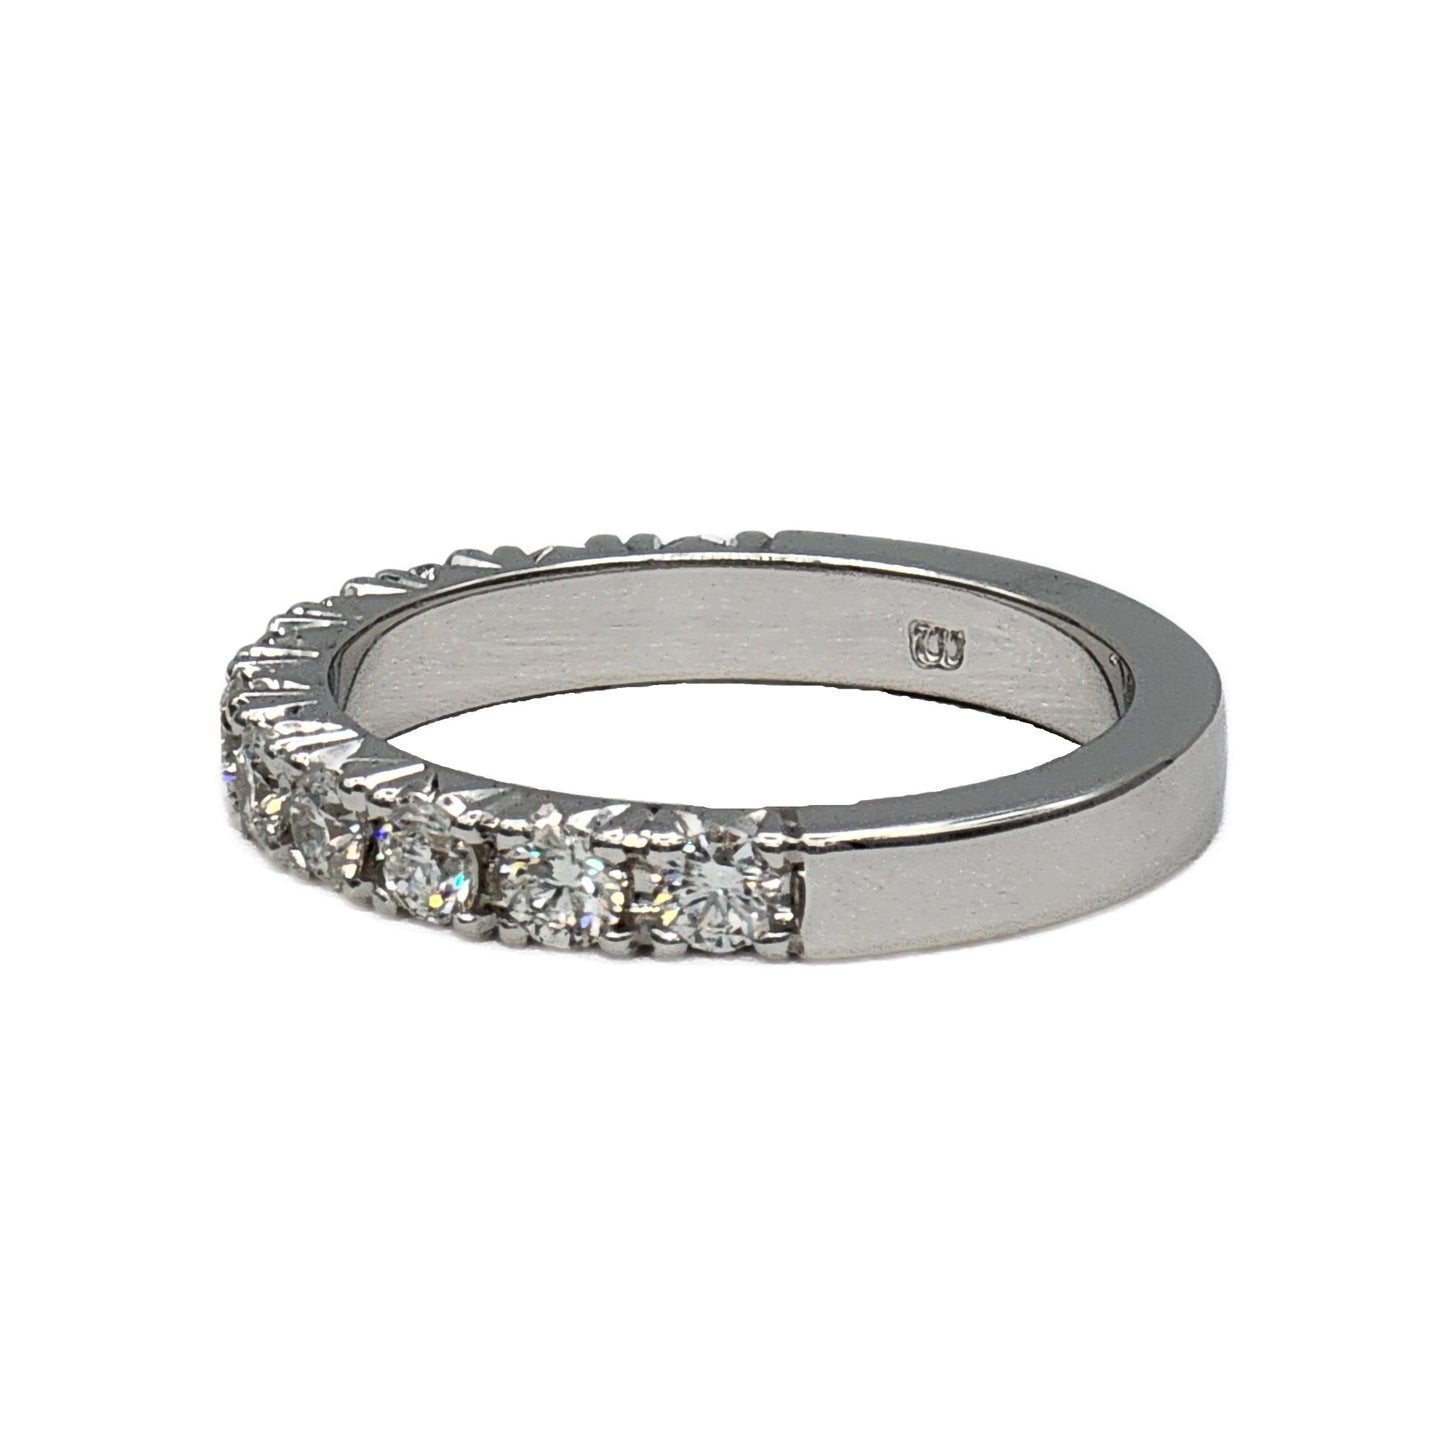 11=0.77 Carat Total Weight Round Brilliant Cut Diamond Band in 14K White Gold